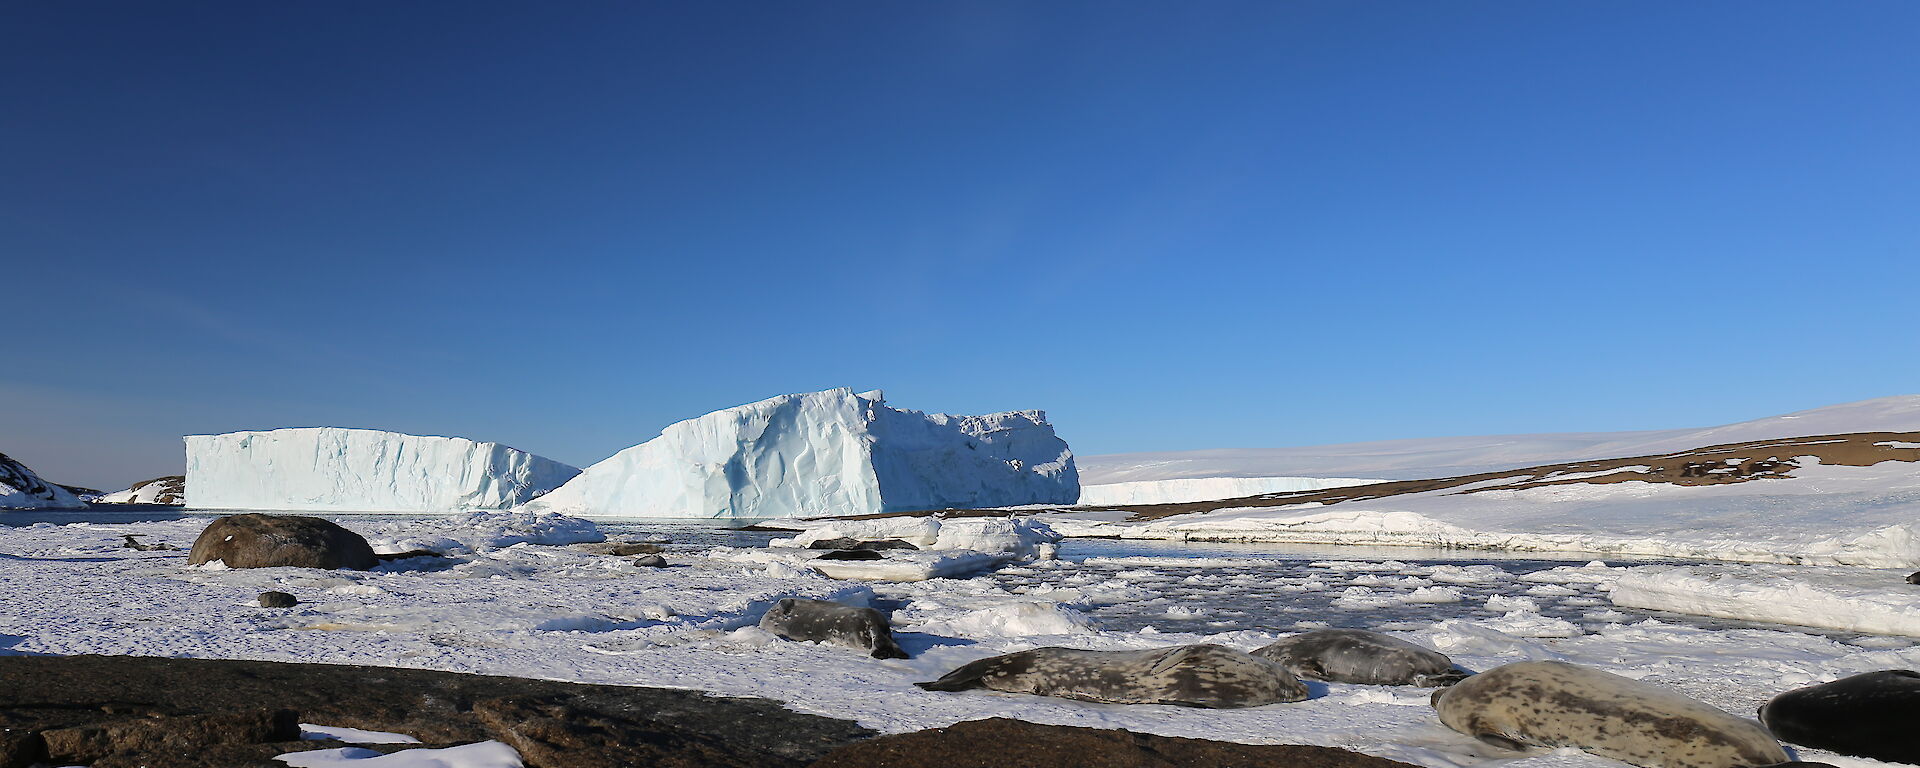 Looking across rock and ice with two icebergs in the distance